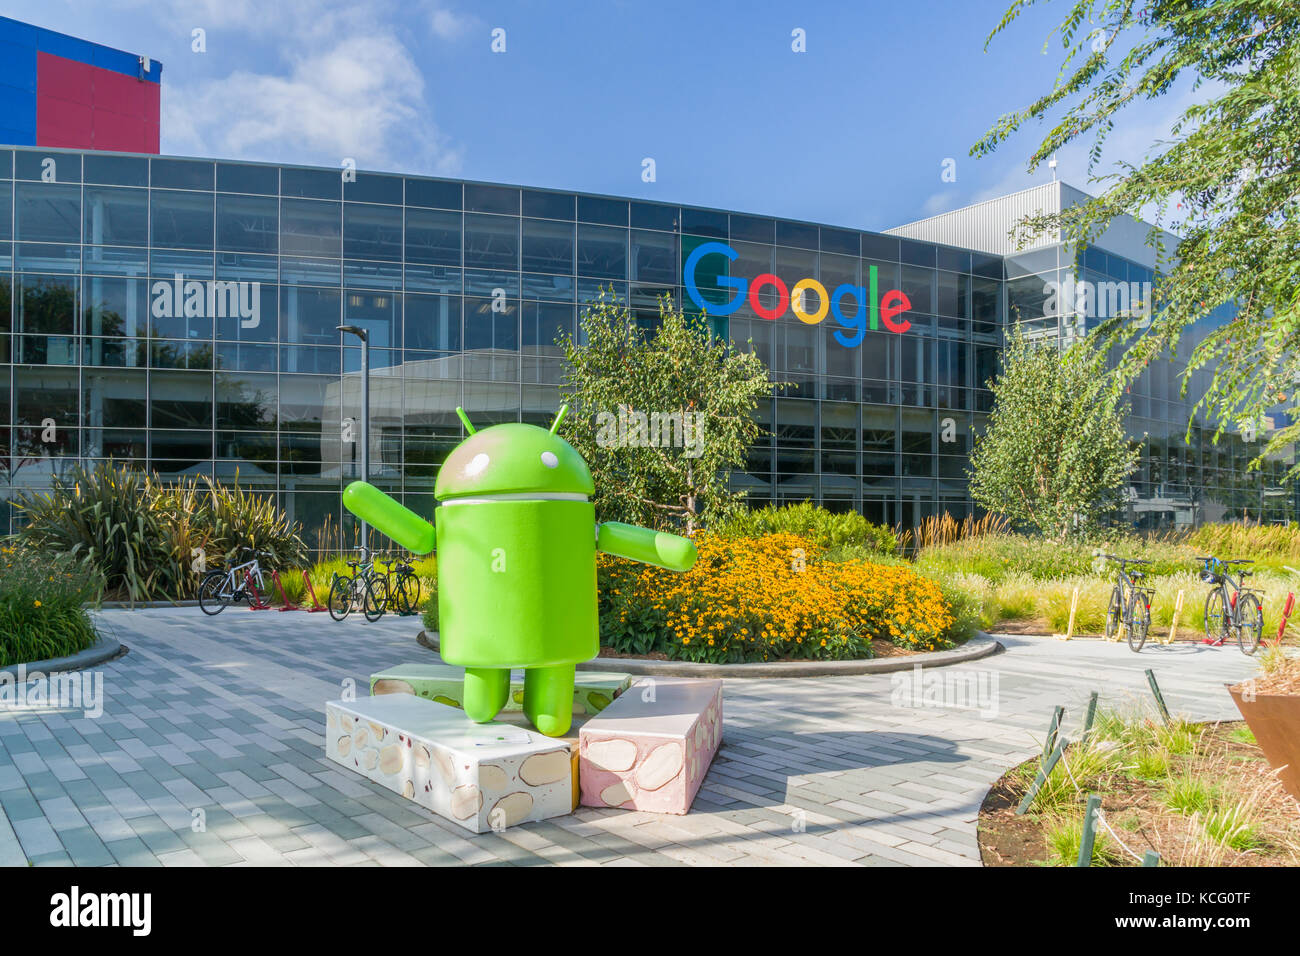 MOUNTAIN VIEW, CA/USA - JULY 30, 2017: Google corporate headquarters and logo. Google is an American multinational technology company that specializes Stock Photo